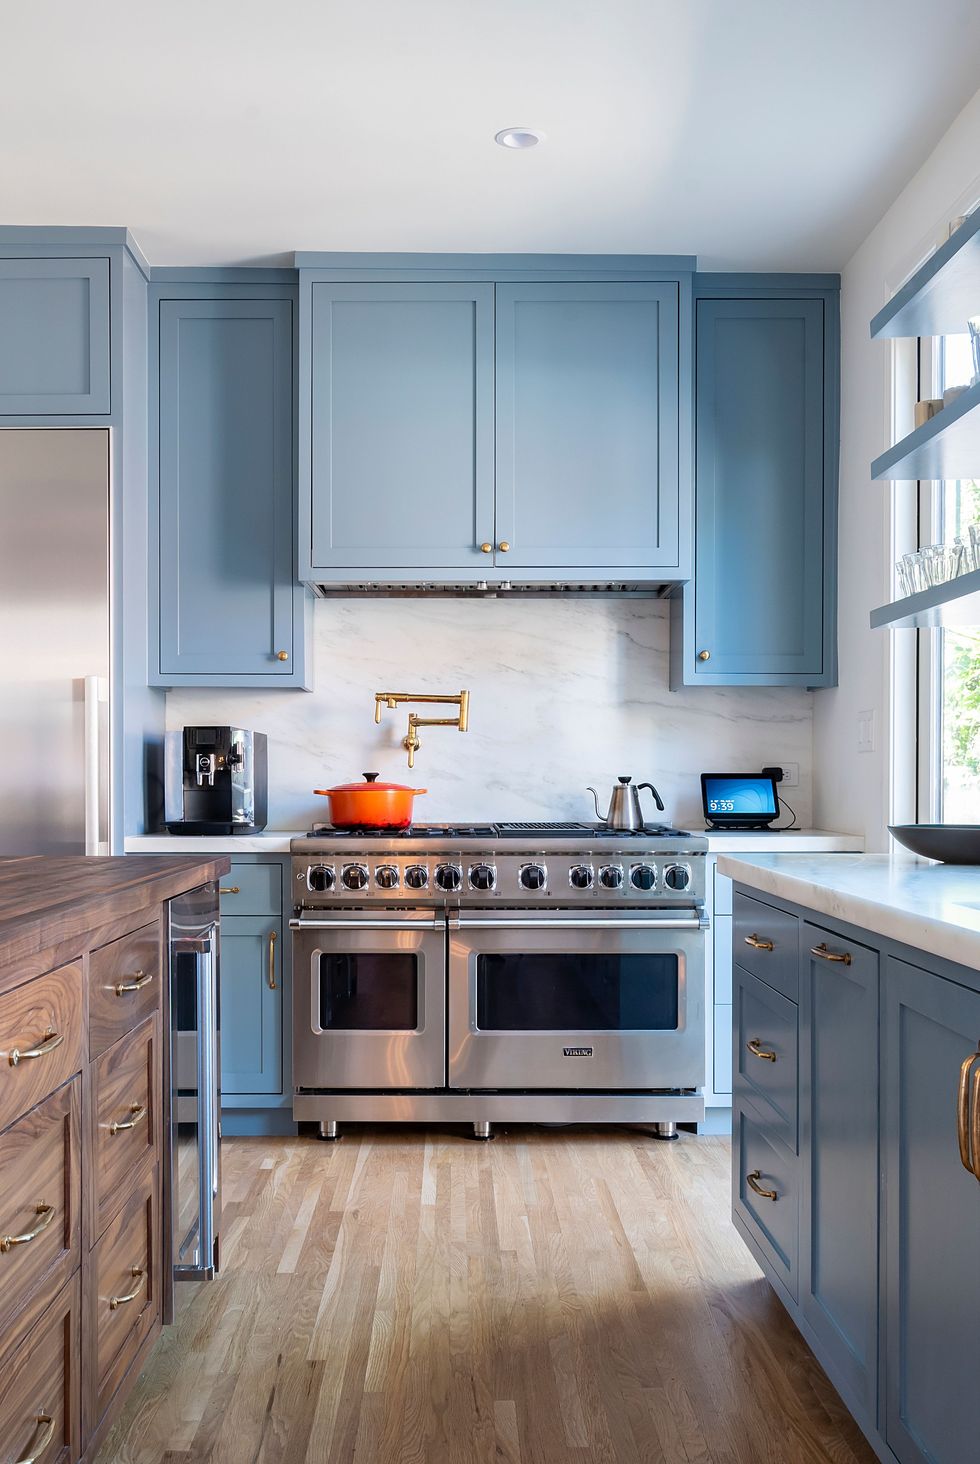 10 Kitchen Trends That Will Be Hot in 2023 - Top Kitchen Trends